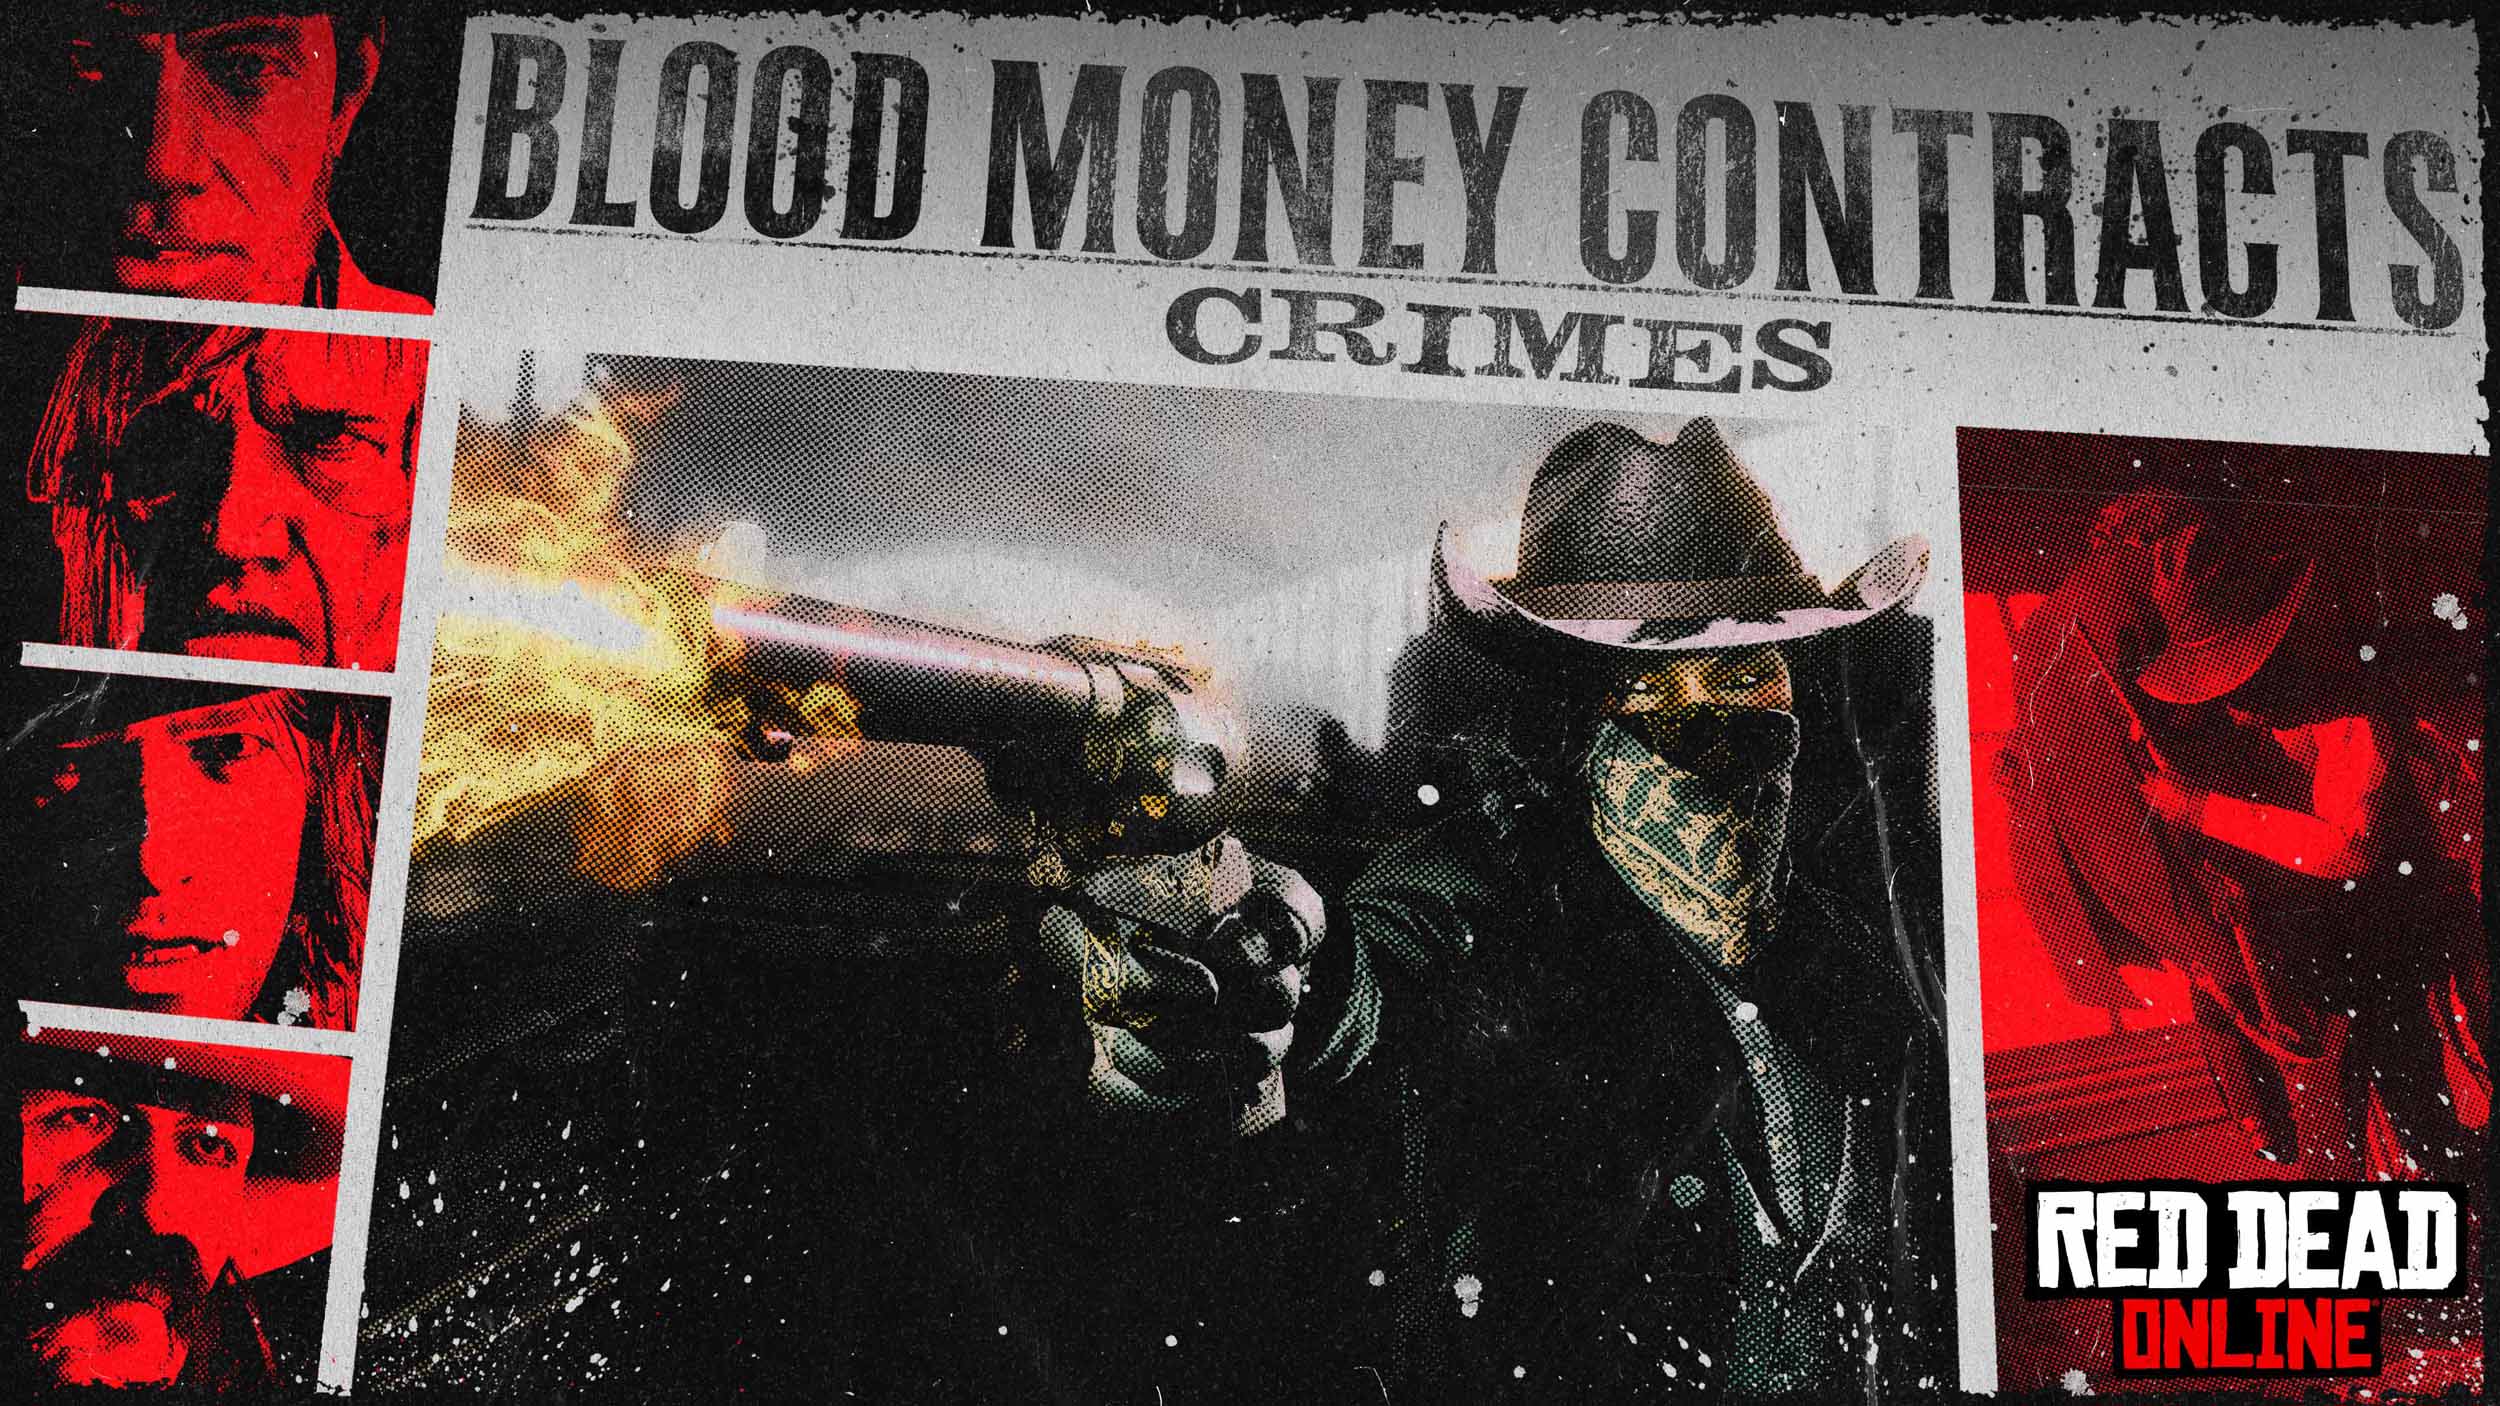 Red Dead Online Bonuses and Rewards on Blood Money Contracts &amp; more